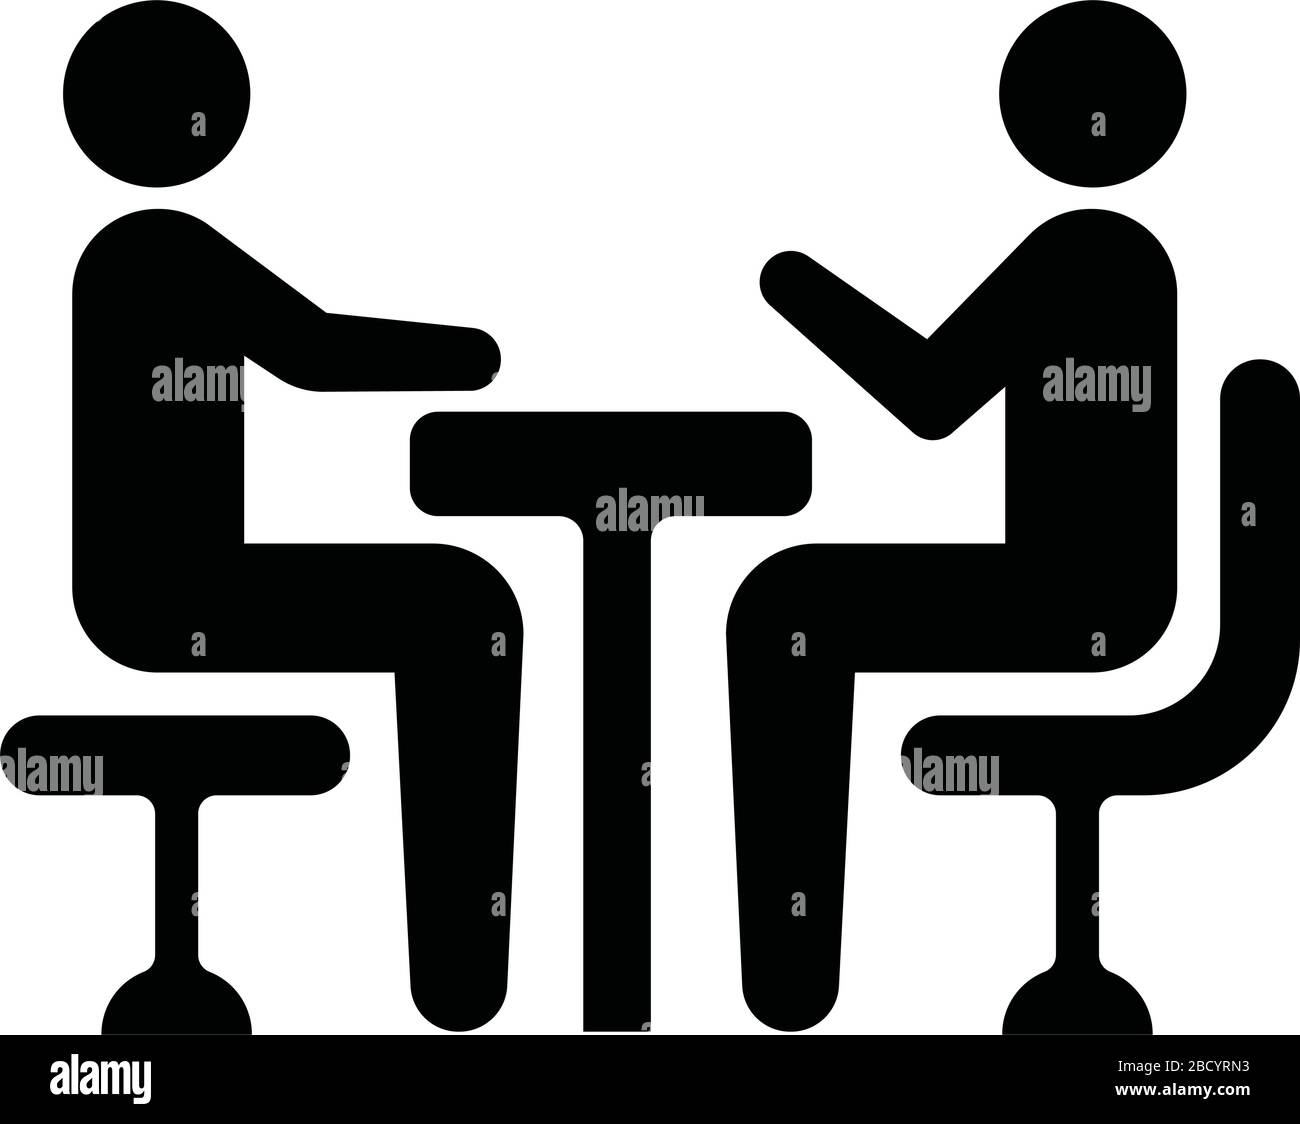 meeting, discussion, conversation icon Stock Vector